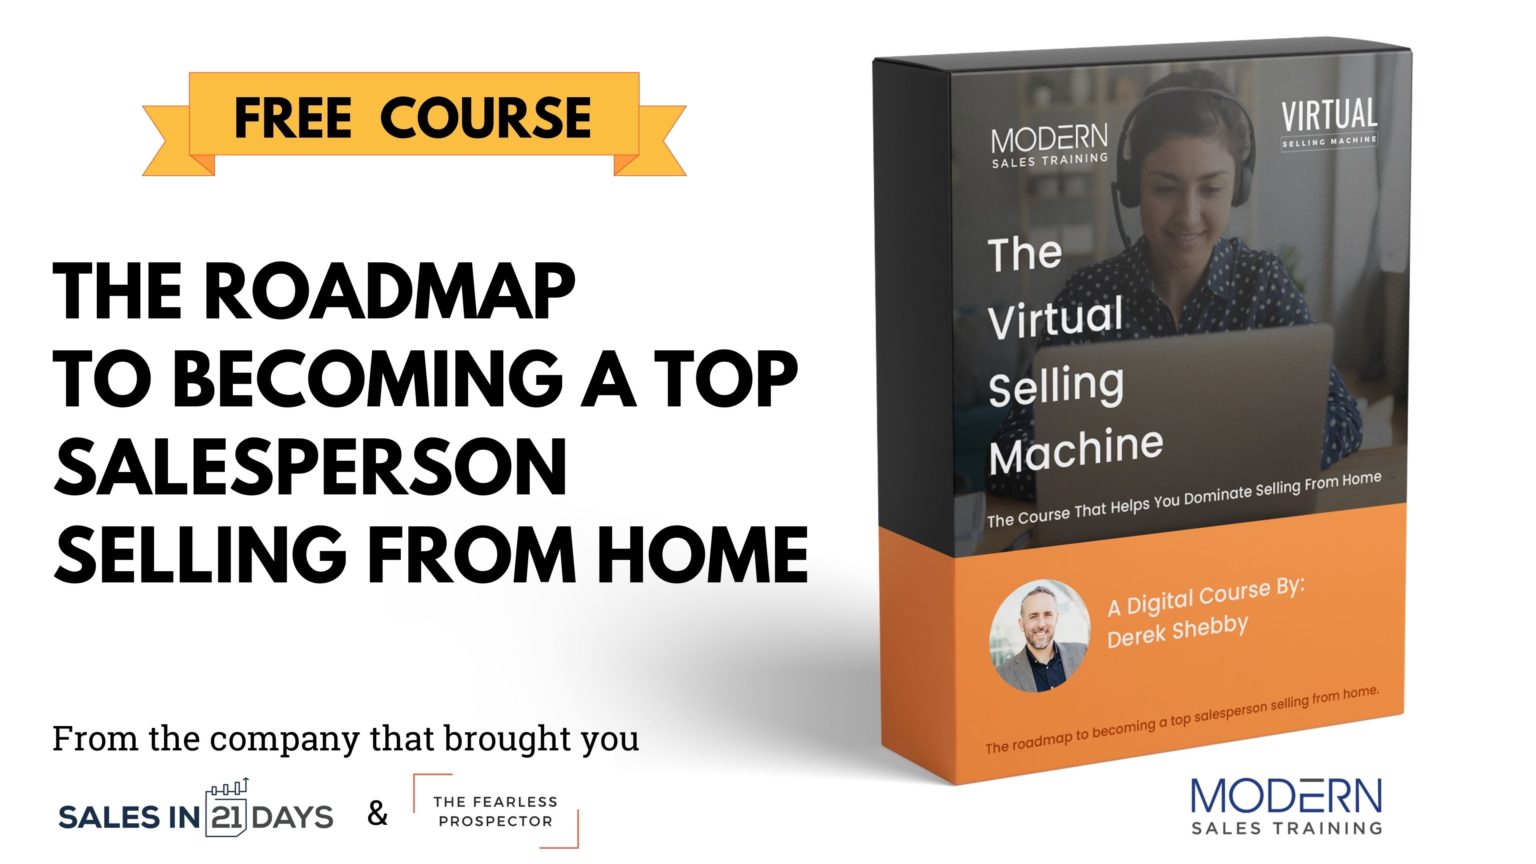 The Virtual Selling Machine Free Course